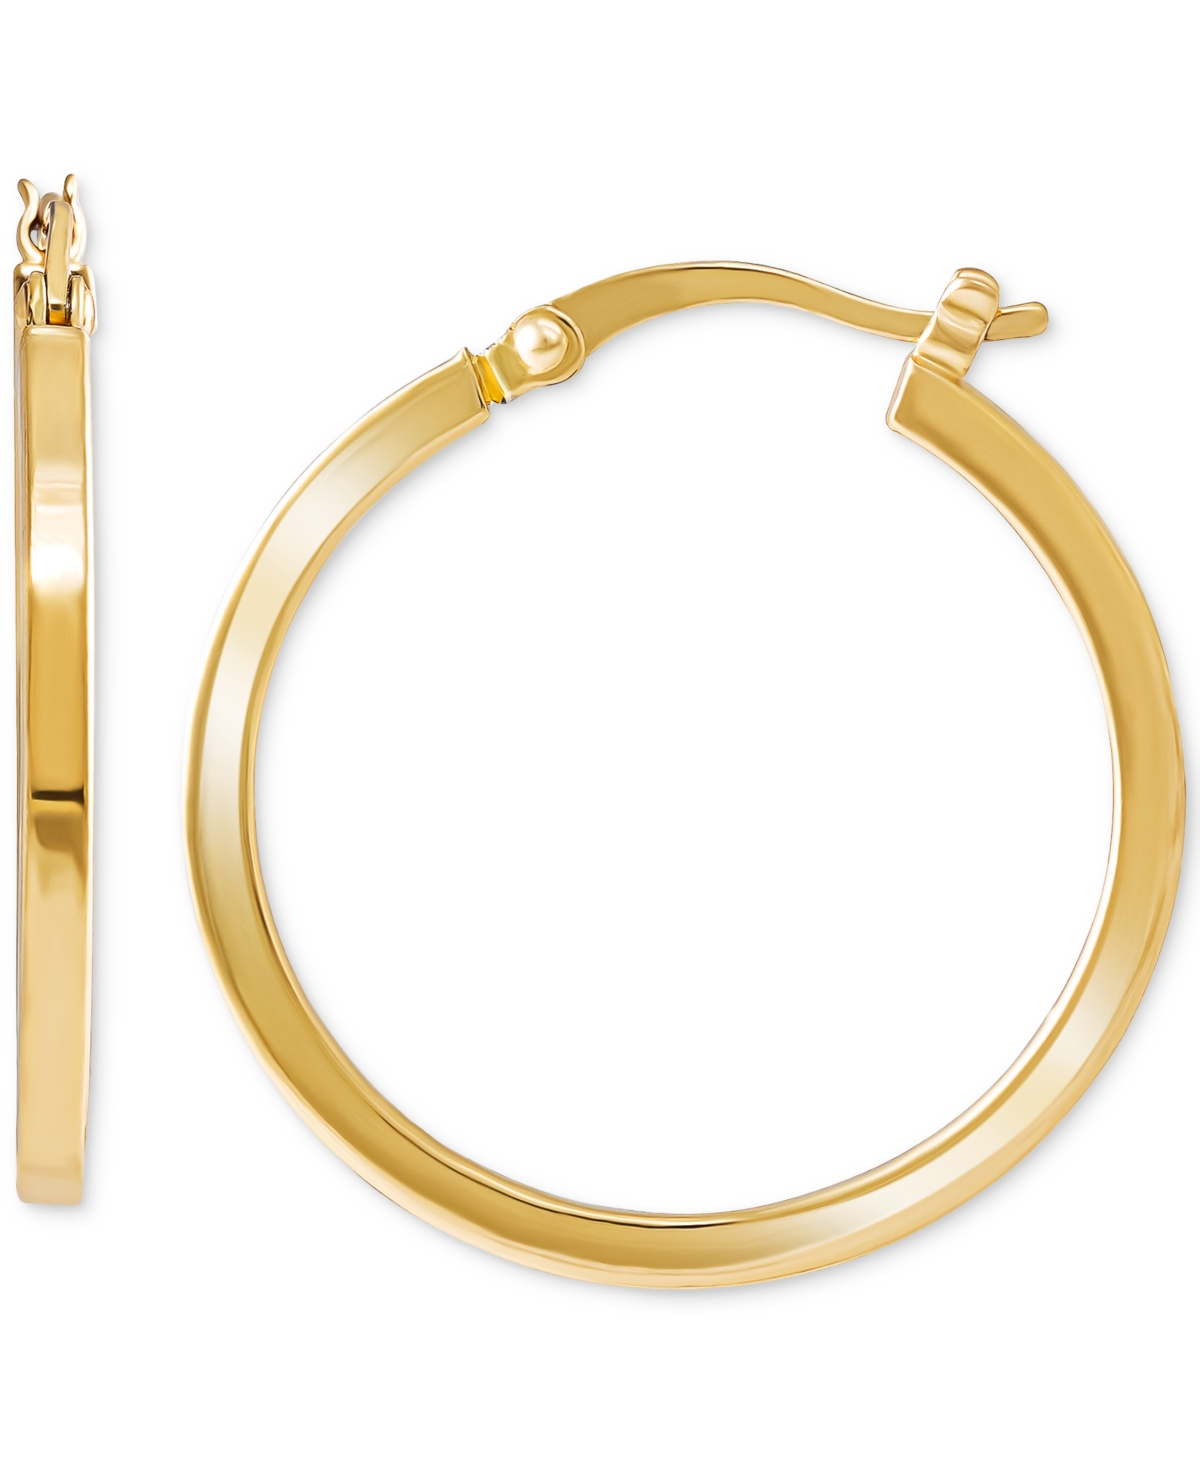 Polished Squared Tube Small Hoop Earrings in 18k Gold-Plated Sterling Silver, 7/8", Created for Macy's - Gold Over Silver